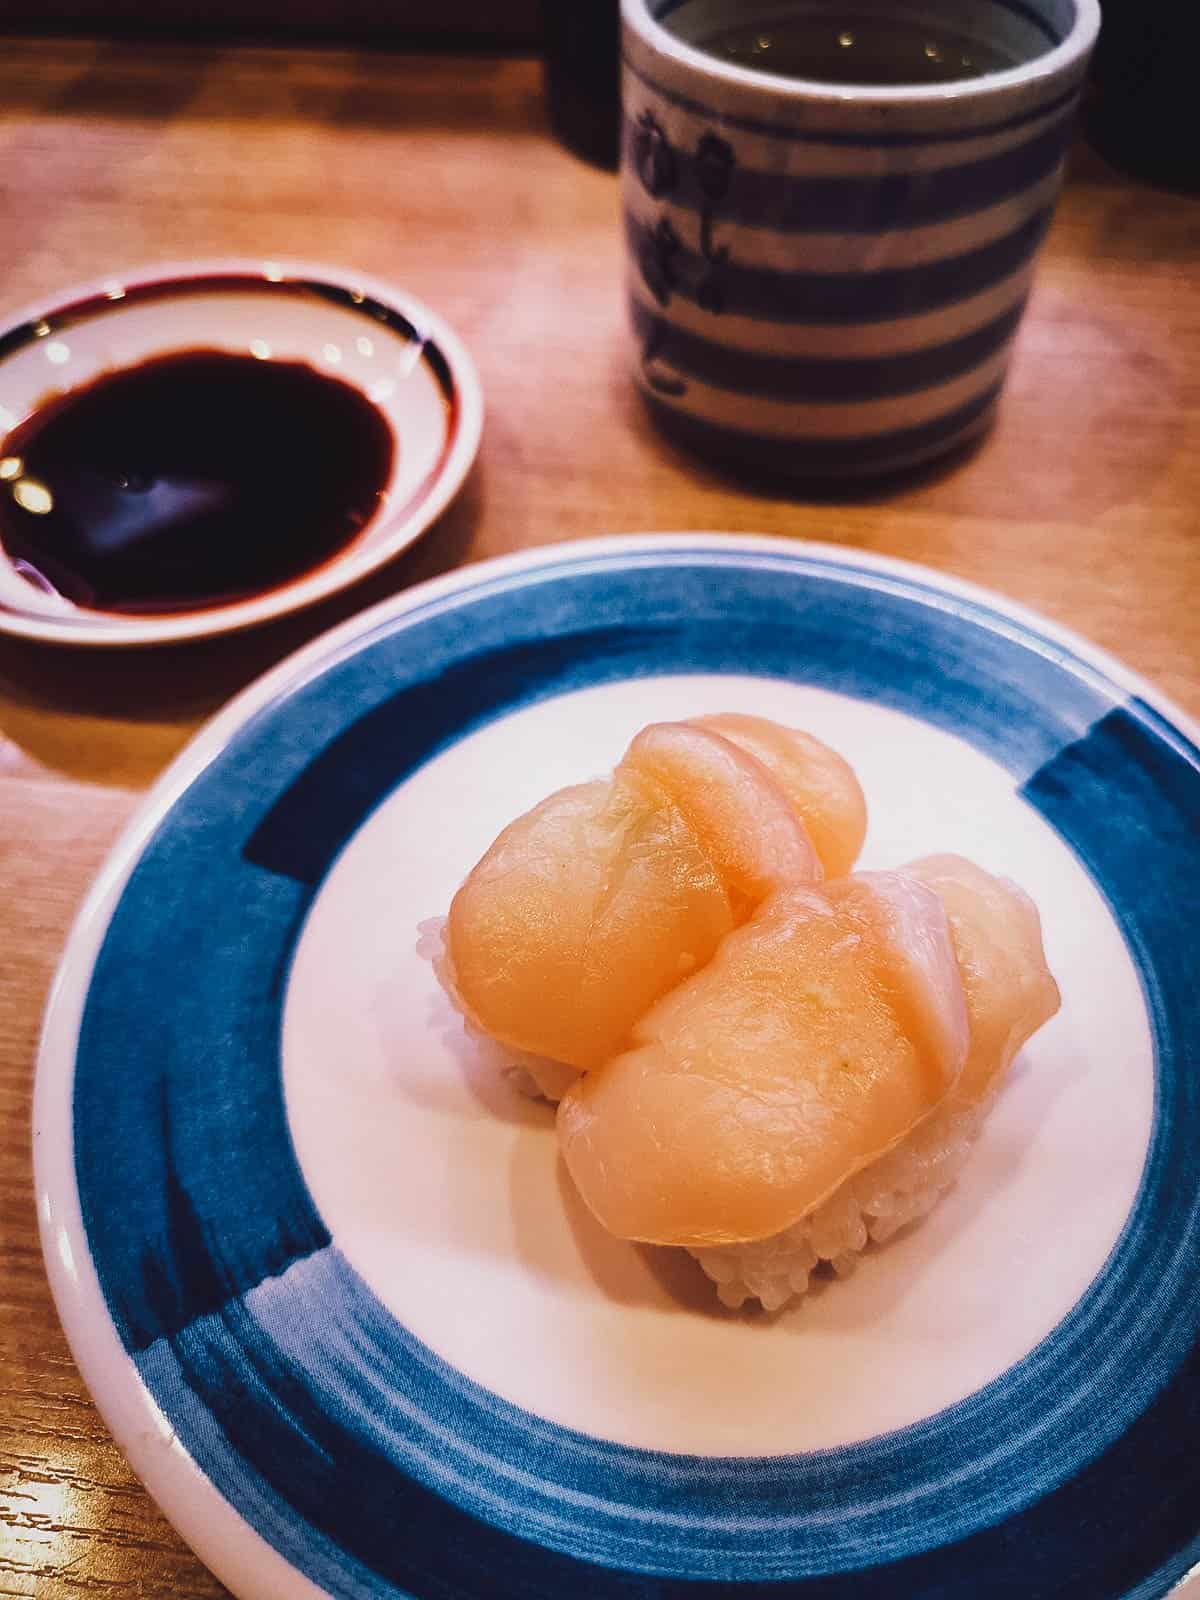 Plate of scallop sushi at a restaurant in Kyoto